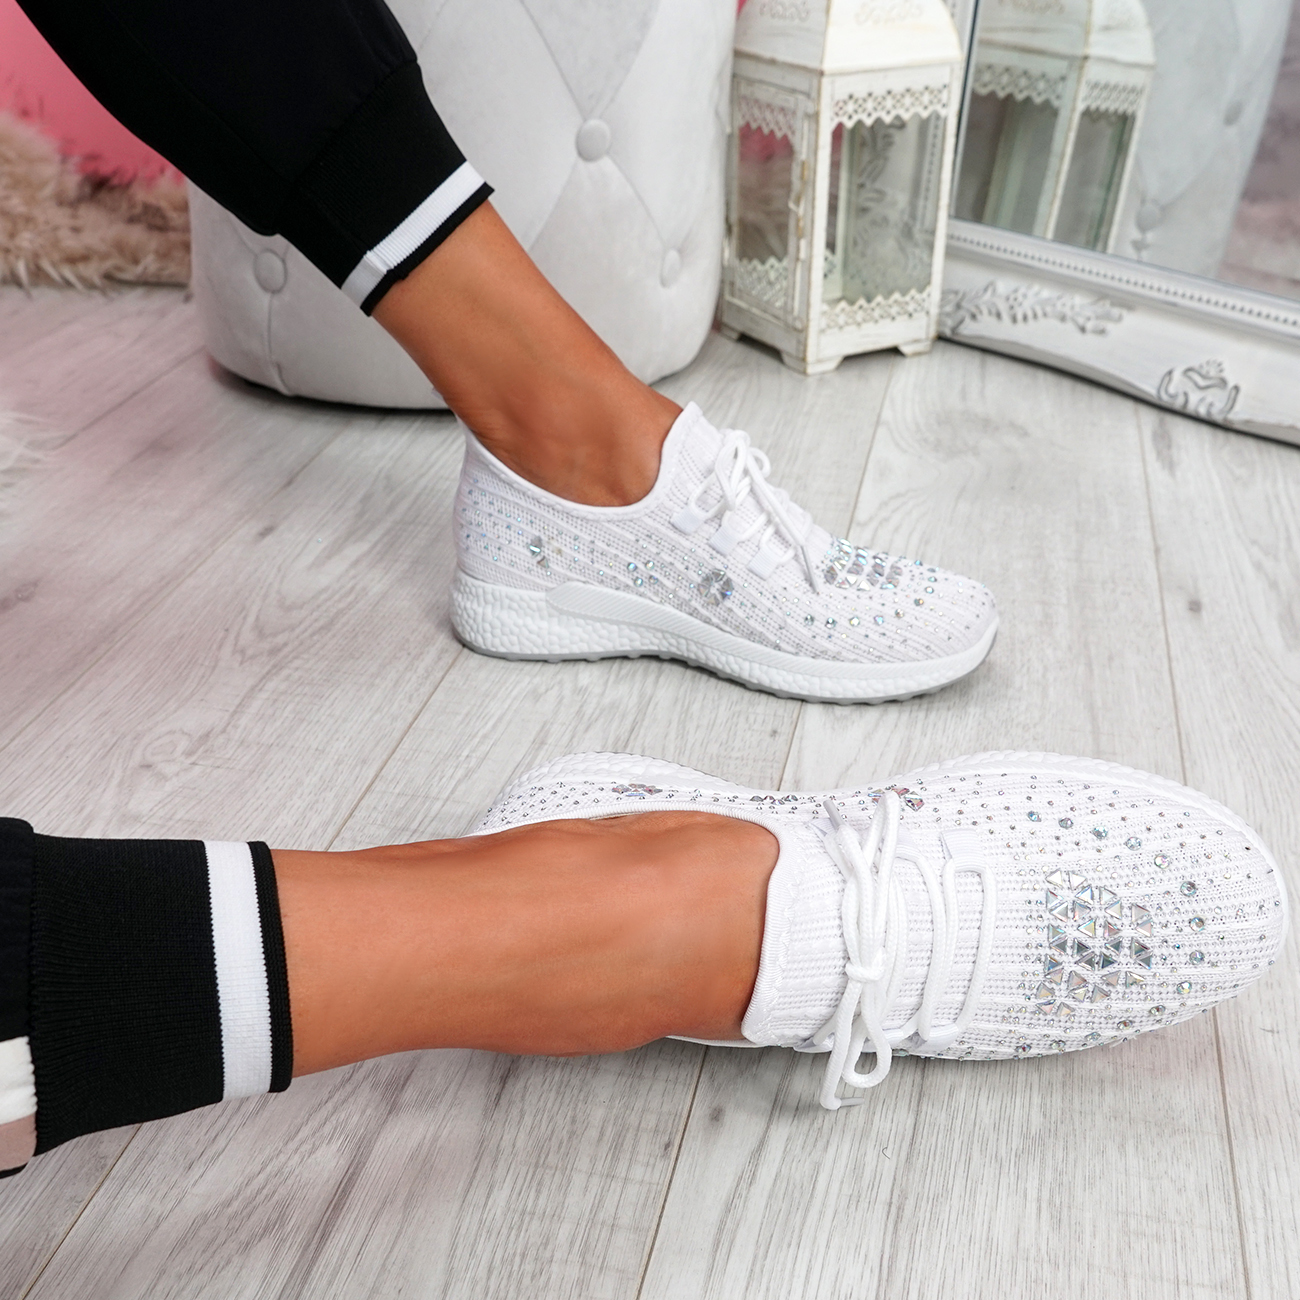 WOMENS LADIES KNIT DIAMANTE STUDDED SPORT TRAINERS SNEAKERS PARTY WOMEN ...